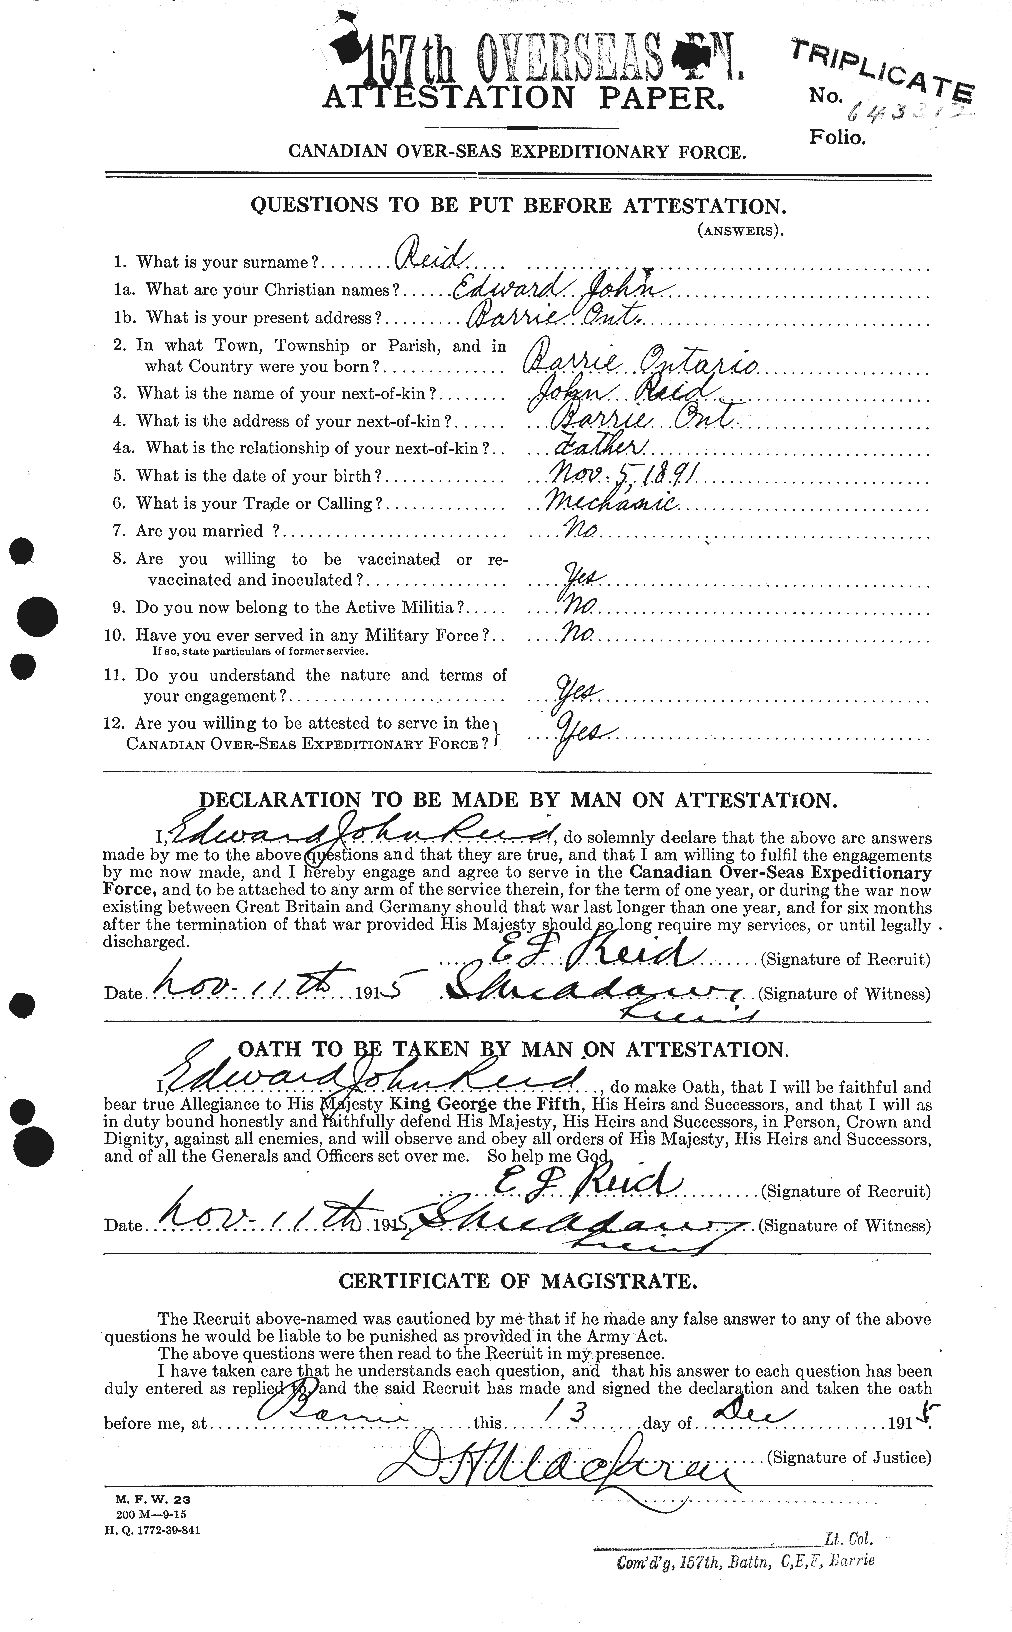 Personnel Records of the First World War - CEF 597987a